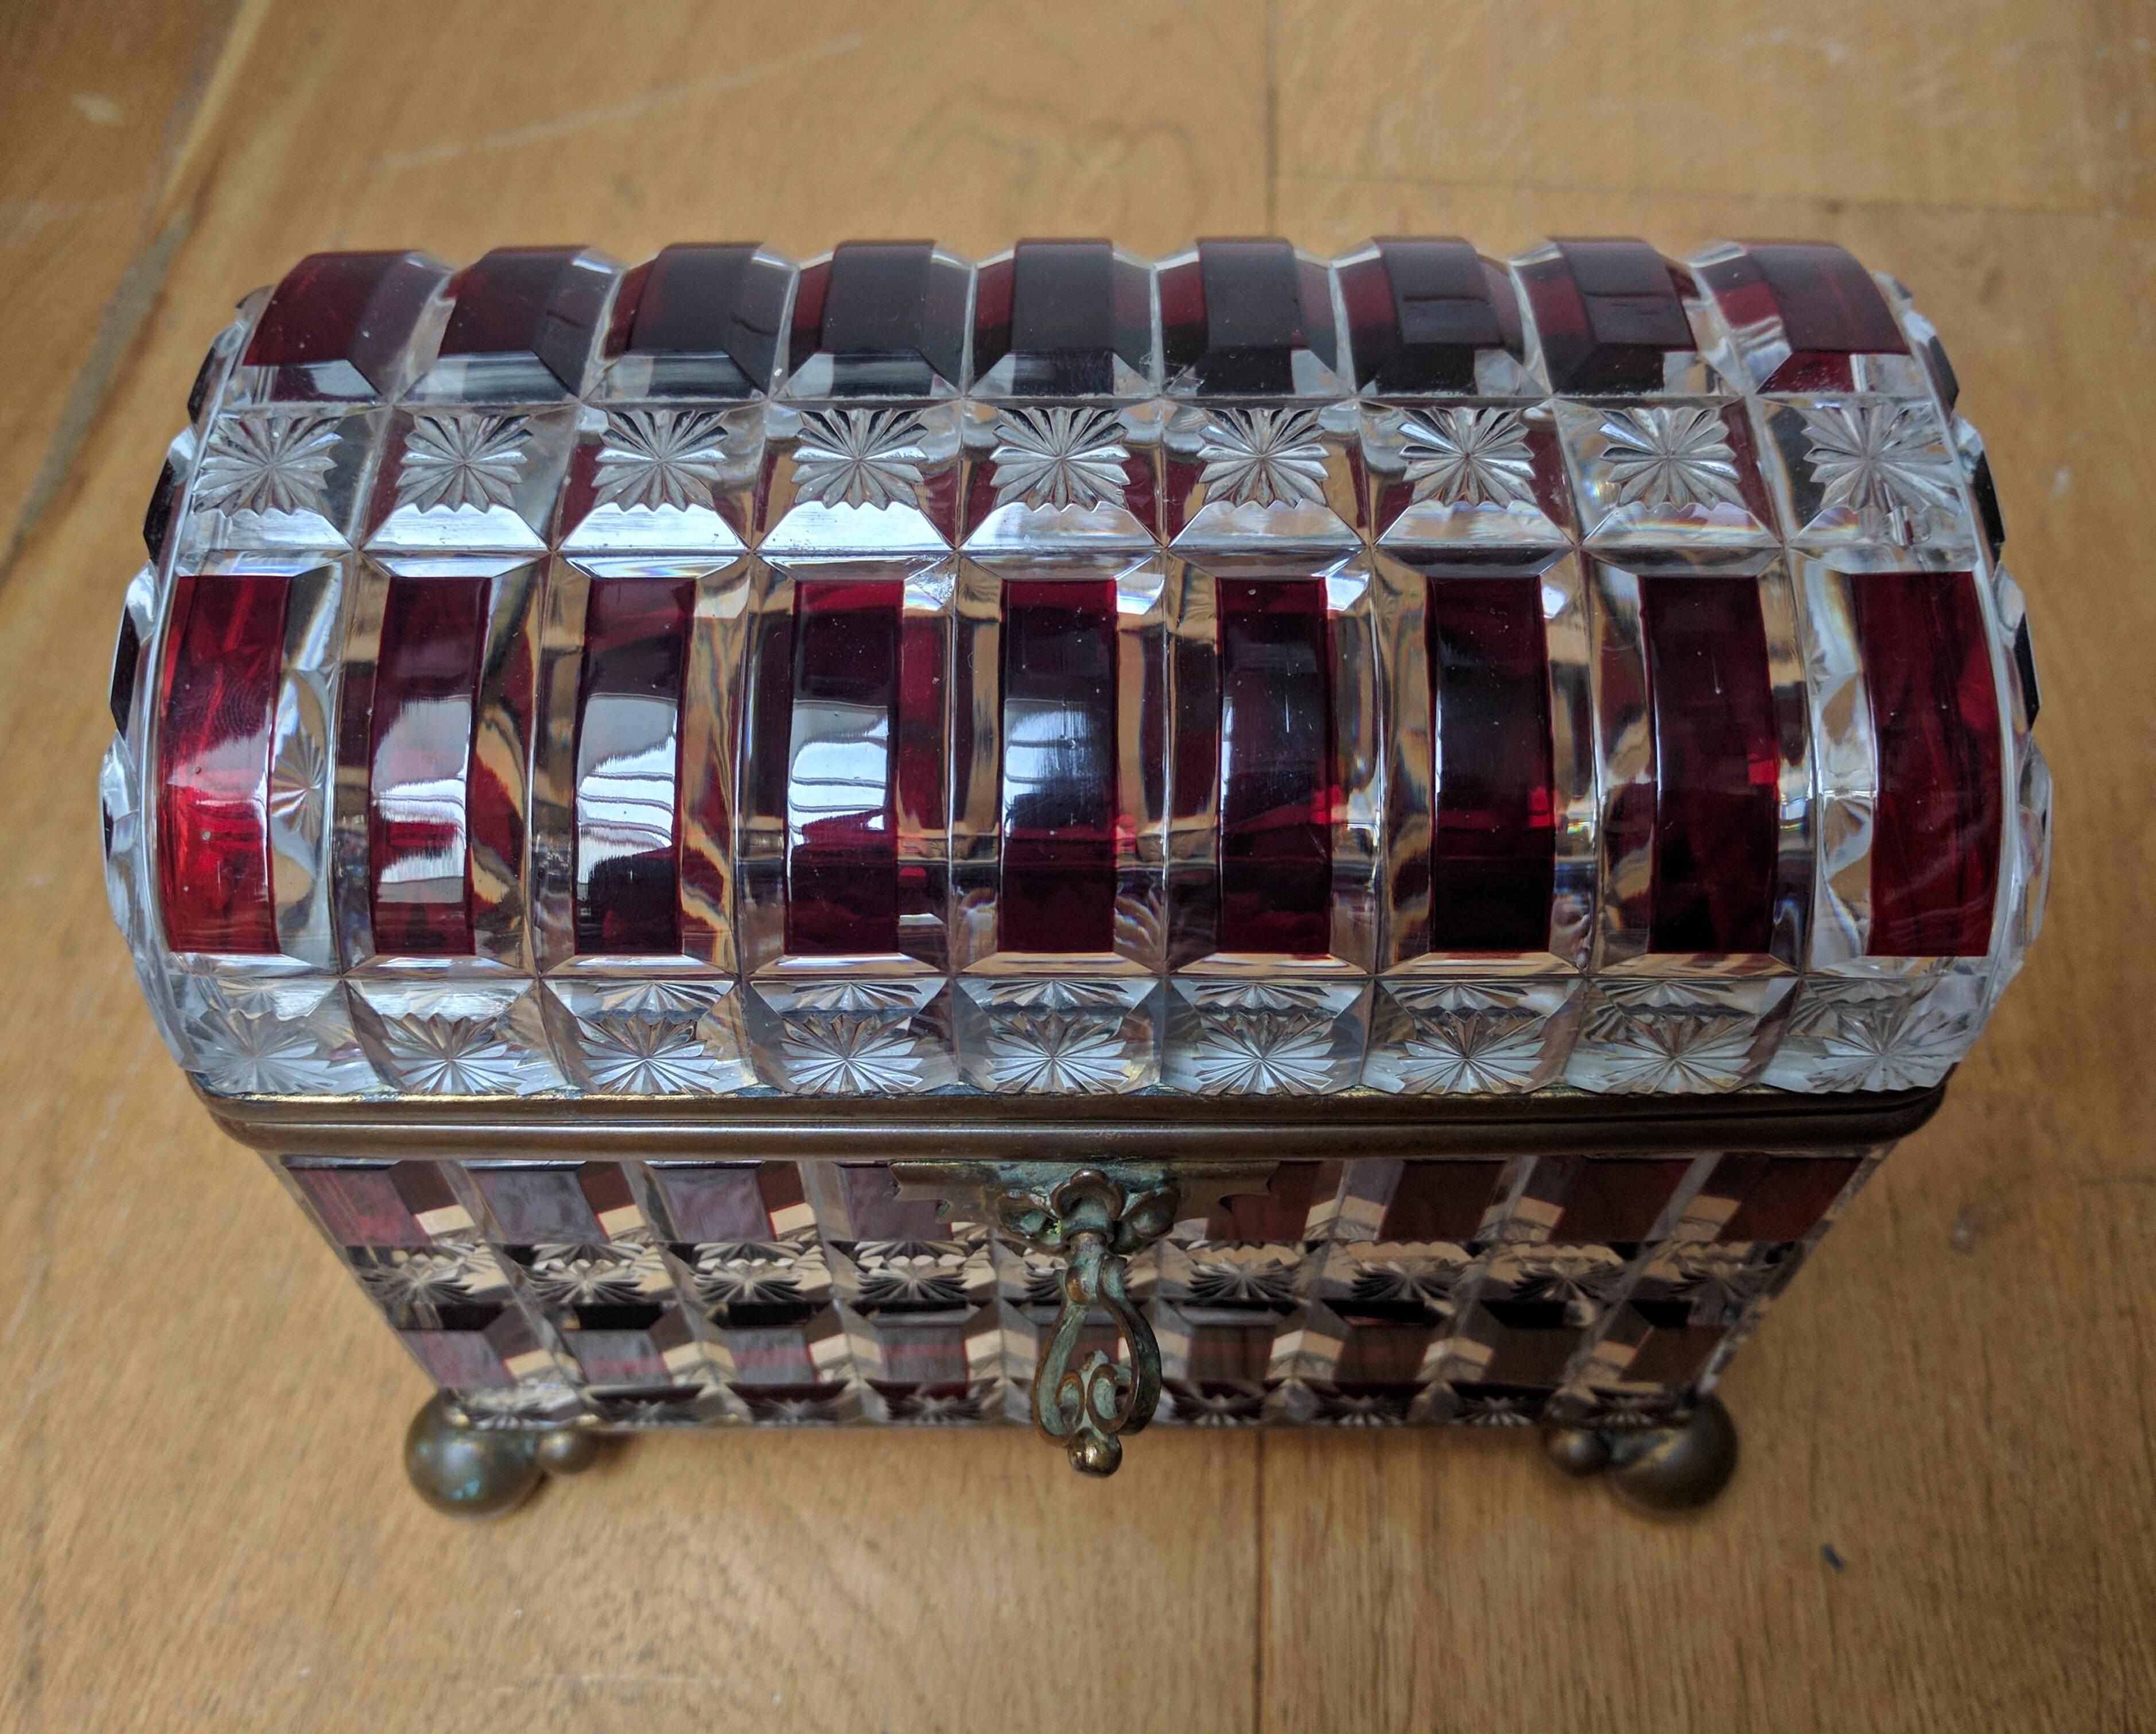 Large French domed top cut crystal and red overlay, and star cut rectangular casket with bronze bun feet and mounts and oversized ring handles on each size, original lock and key mechanism. Signed ‘Maison Siraudin, 17 Rue De La Paix,’ circa